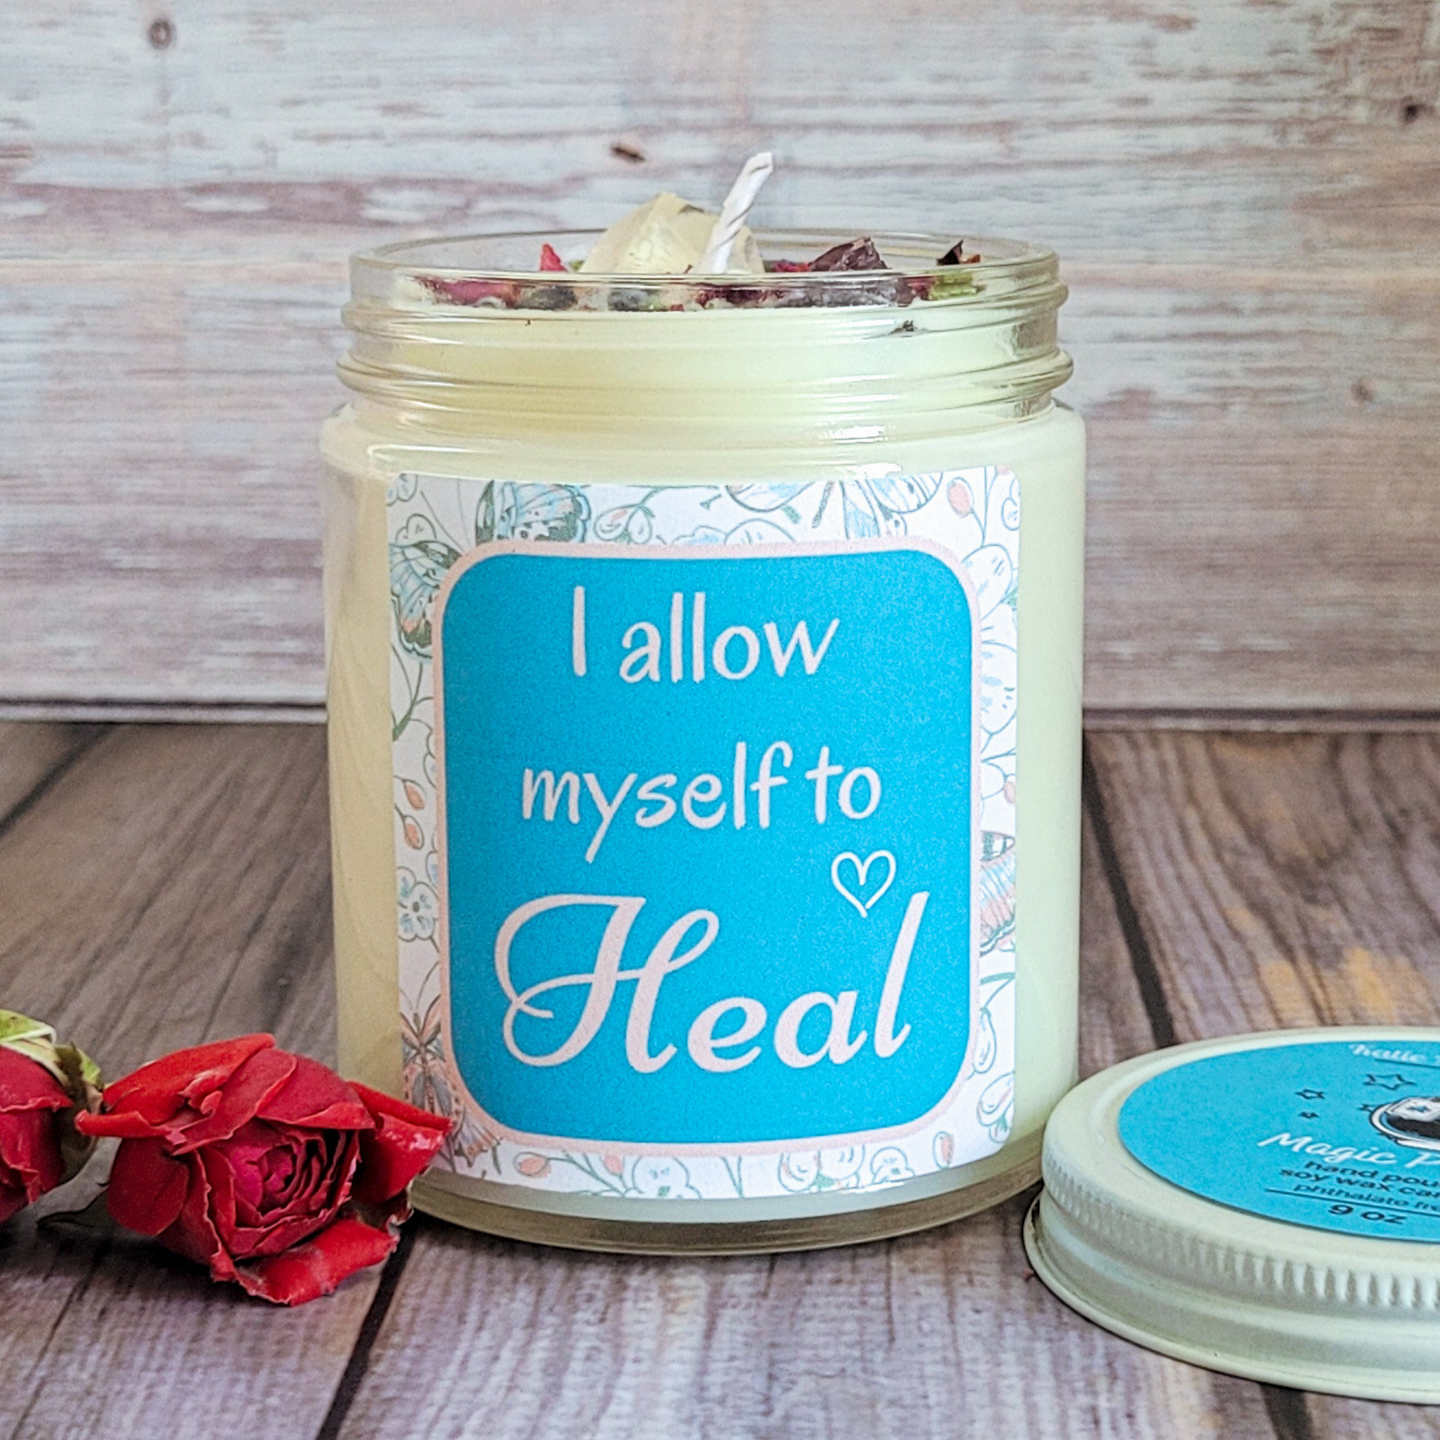 Healing intention candle 